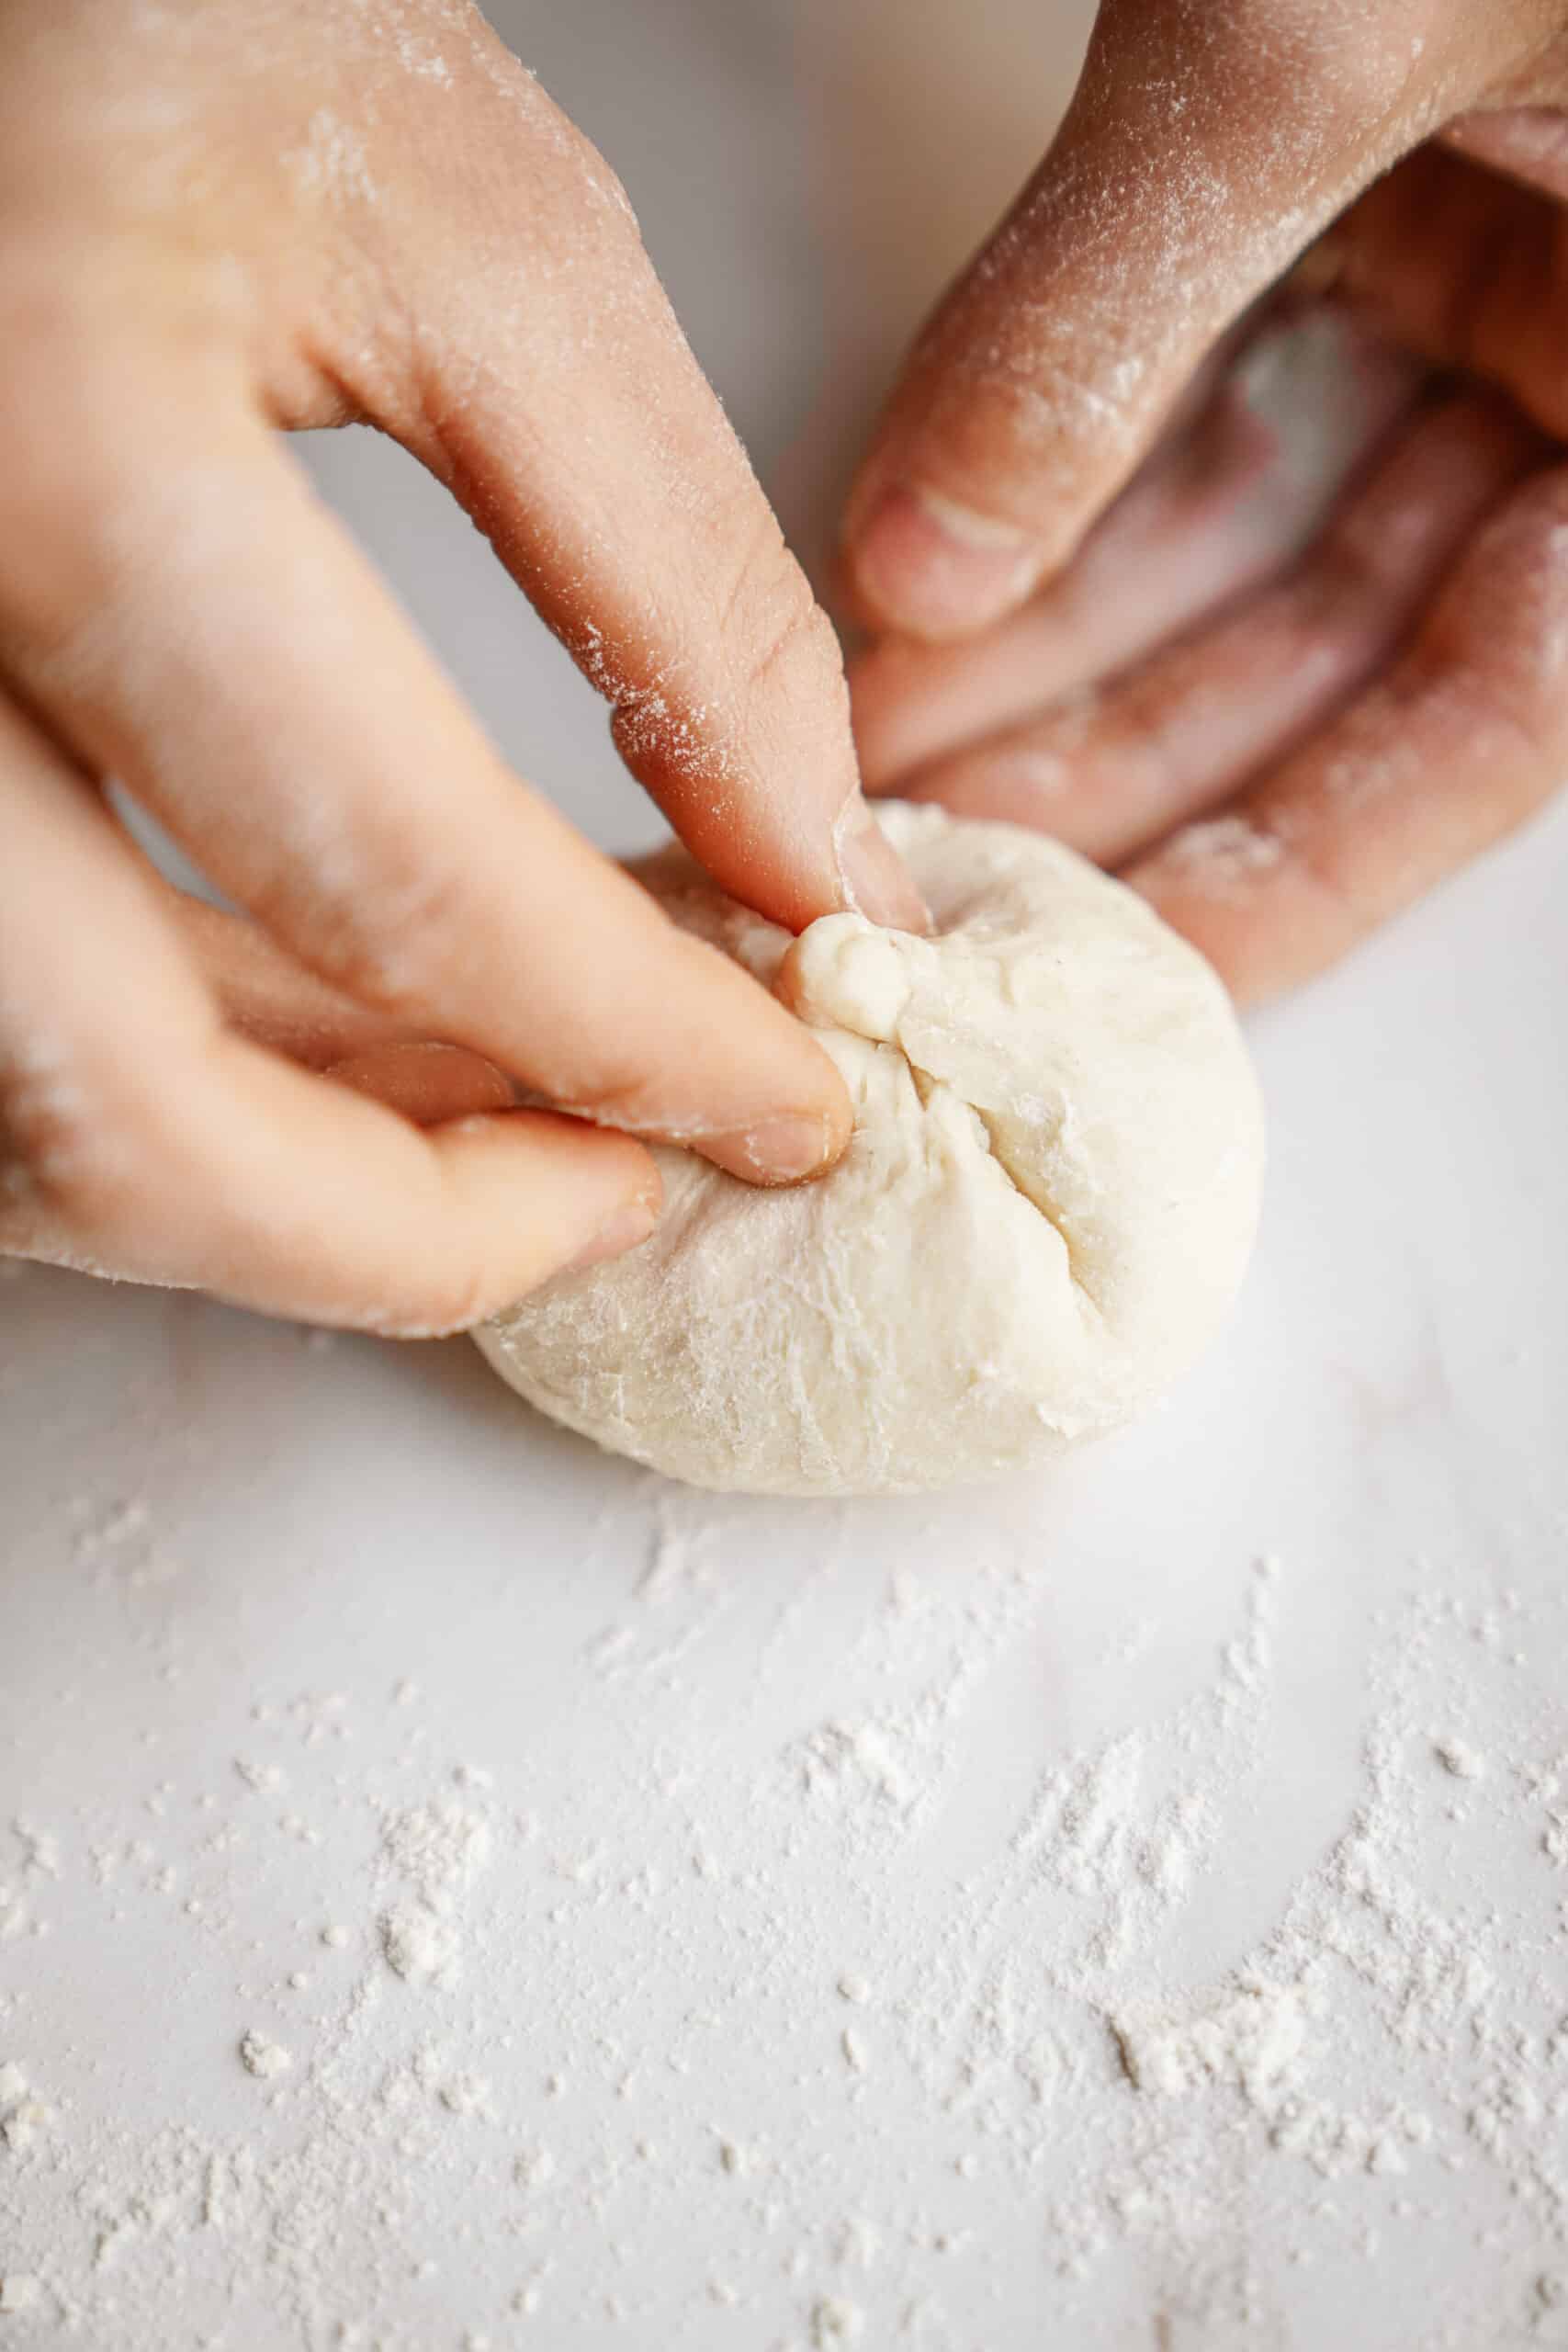 Dough being rolled into dinner rolls